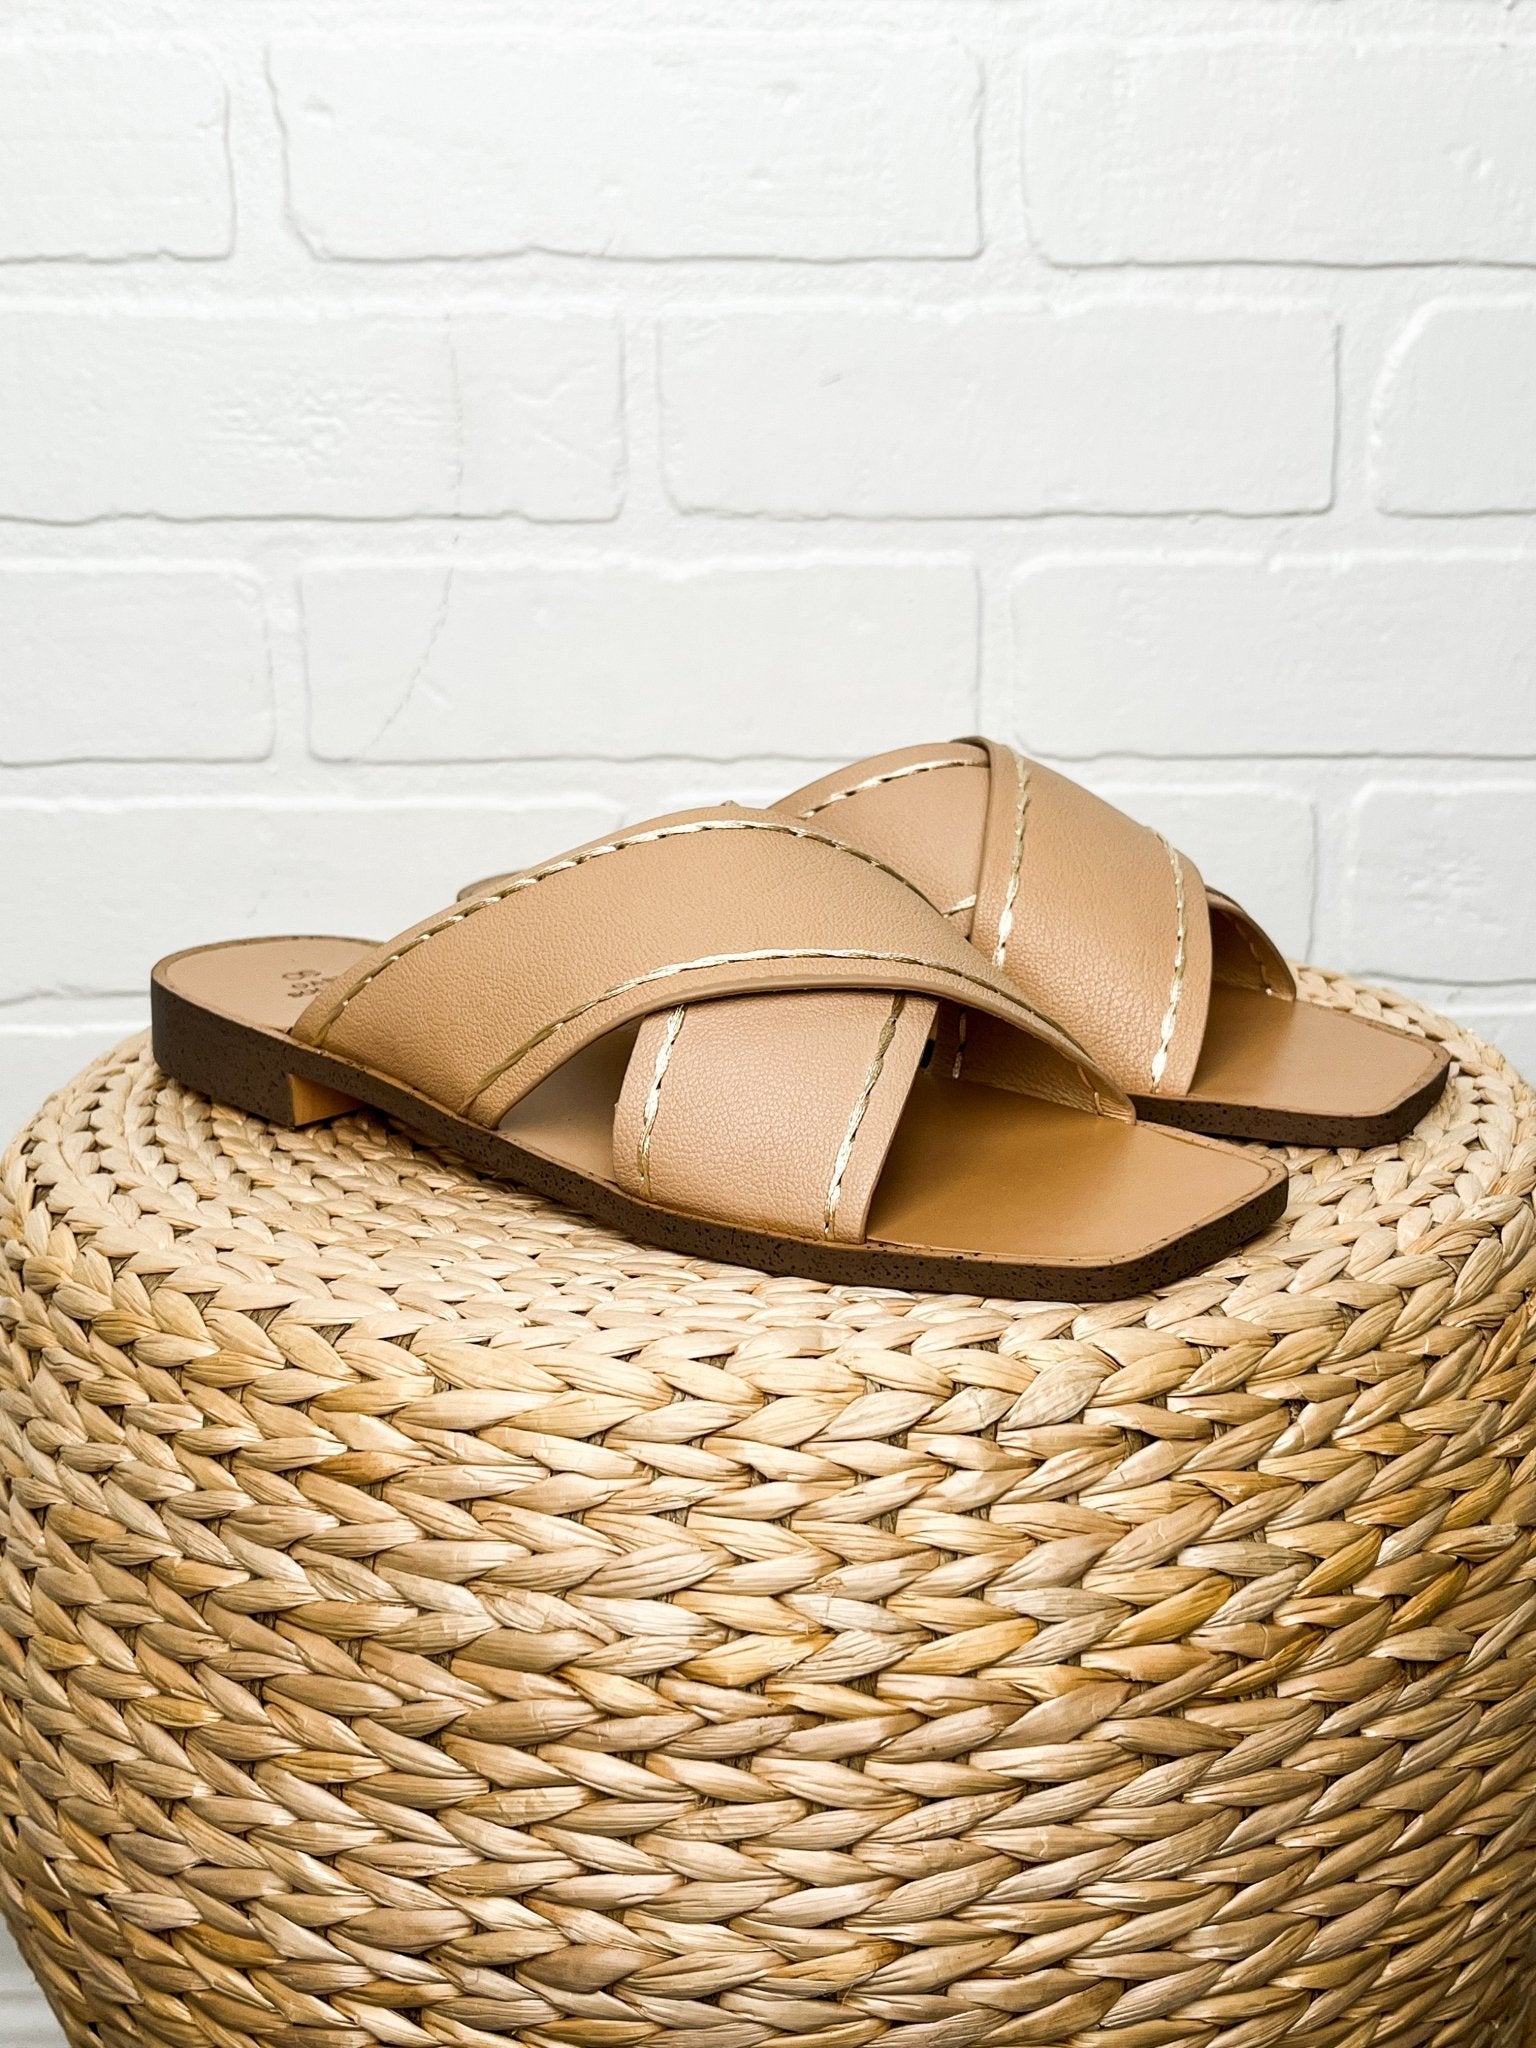 Stella criss cross sandals nude - Trendy shoes - Fashion Shoes at Lush Fashion Lounge Boutique in Oklahoma City